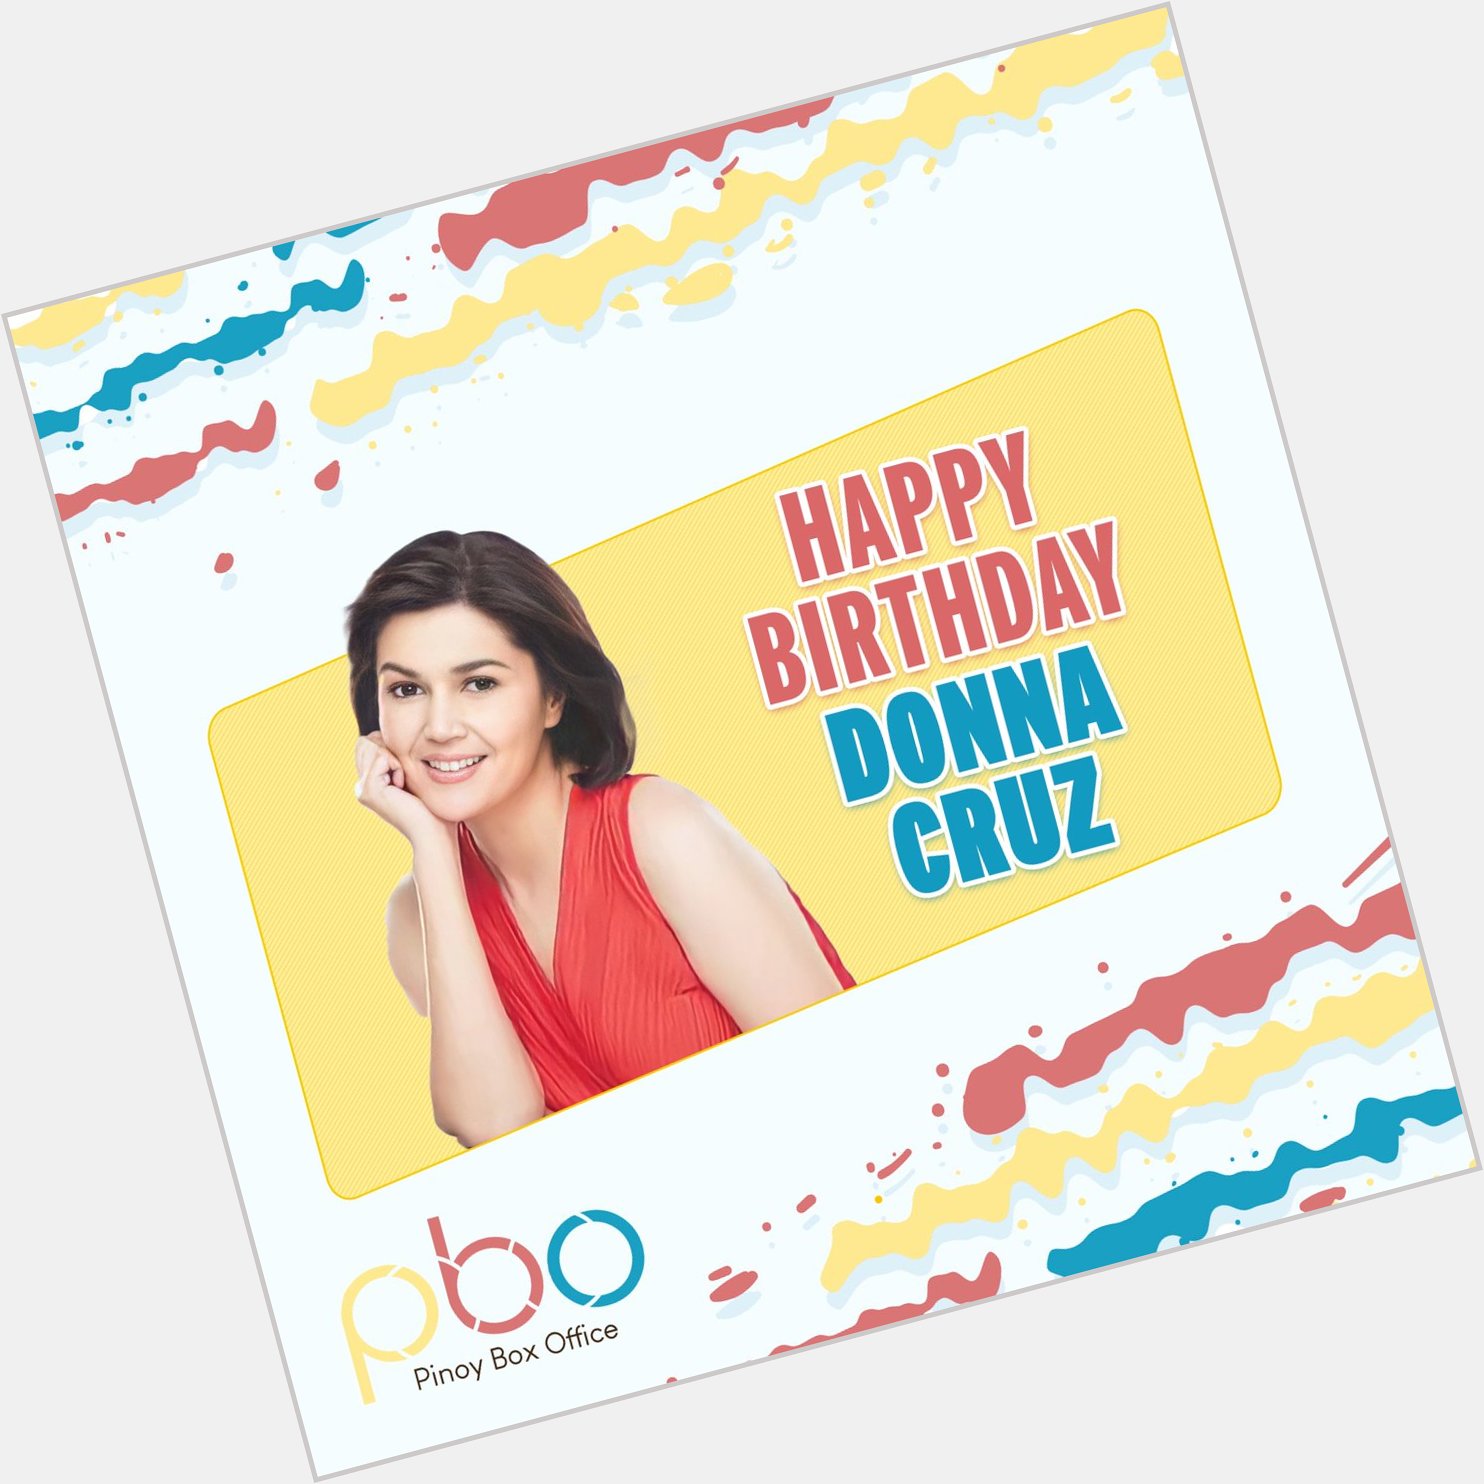 Happy birthday, Donna Cruz! May you live your days happily and with no worries! 